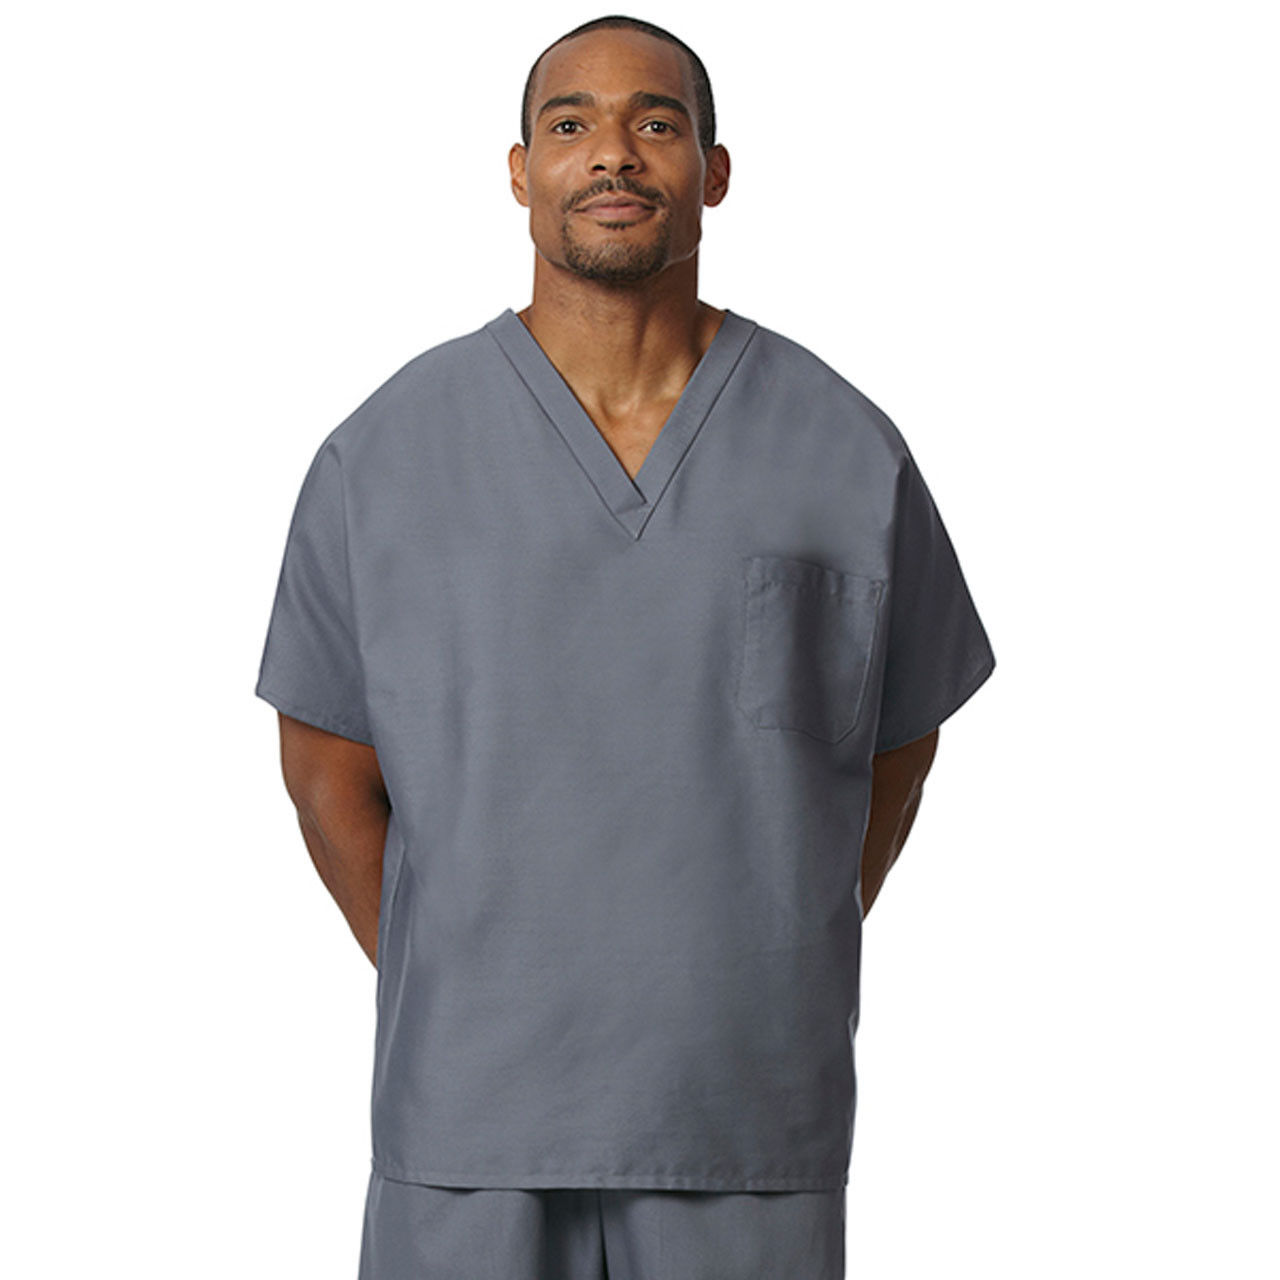 Are there any additional features on the Womens and Mens Tall Scrub Tops?